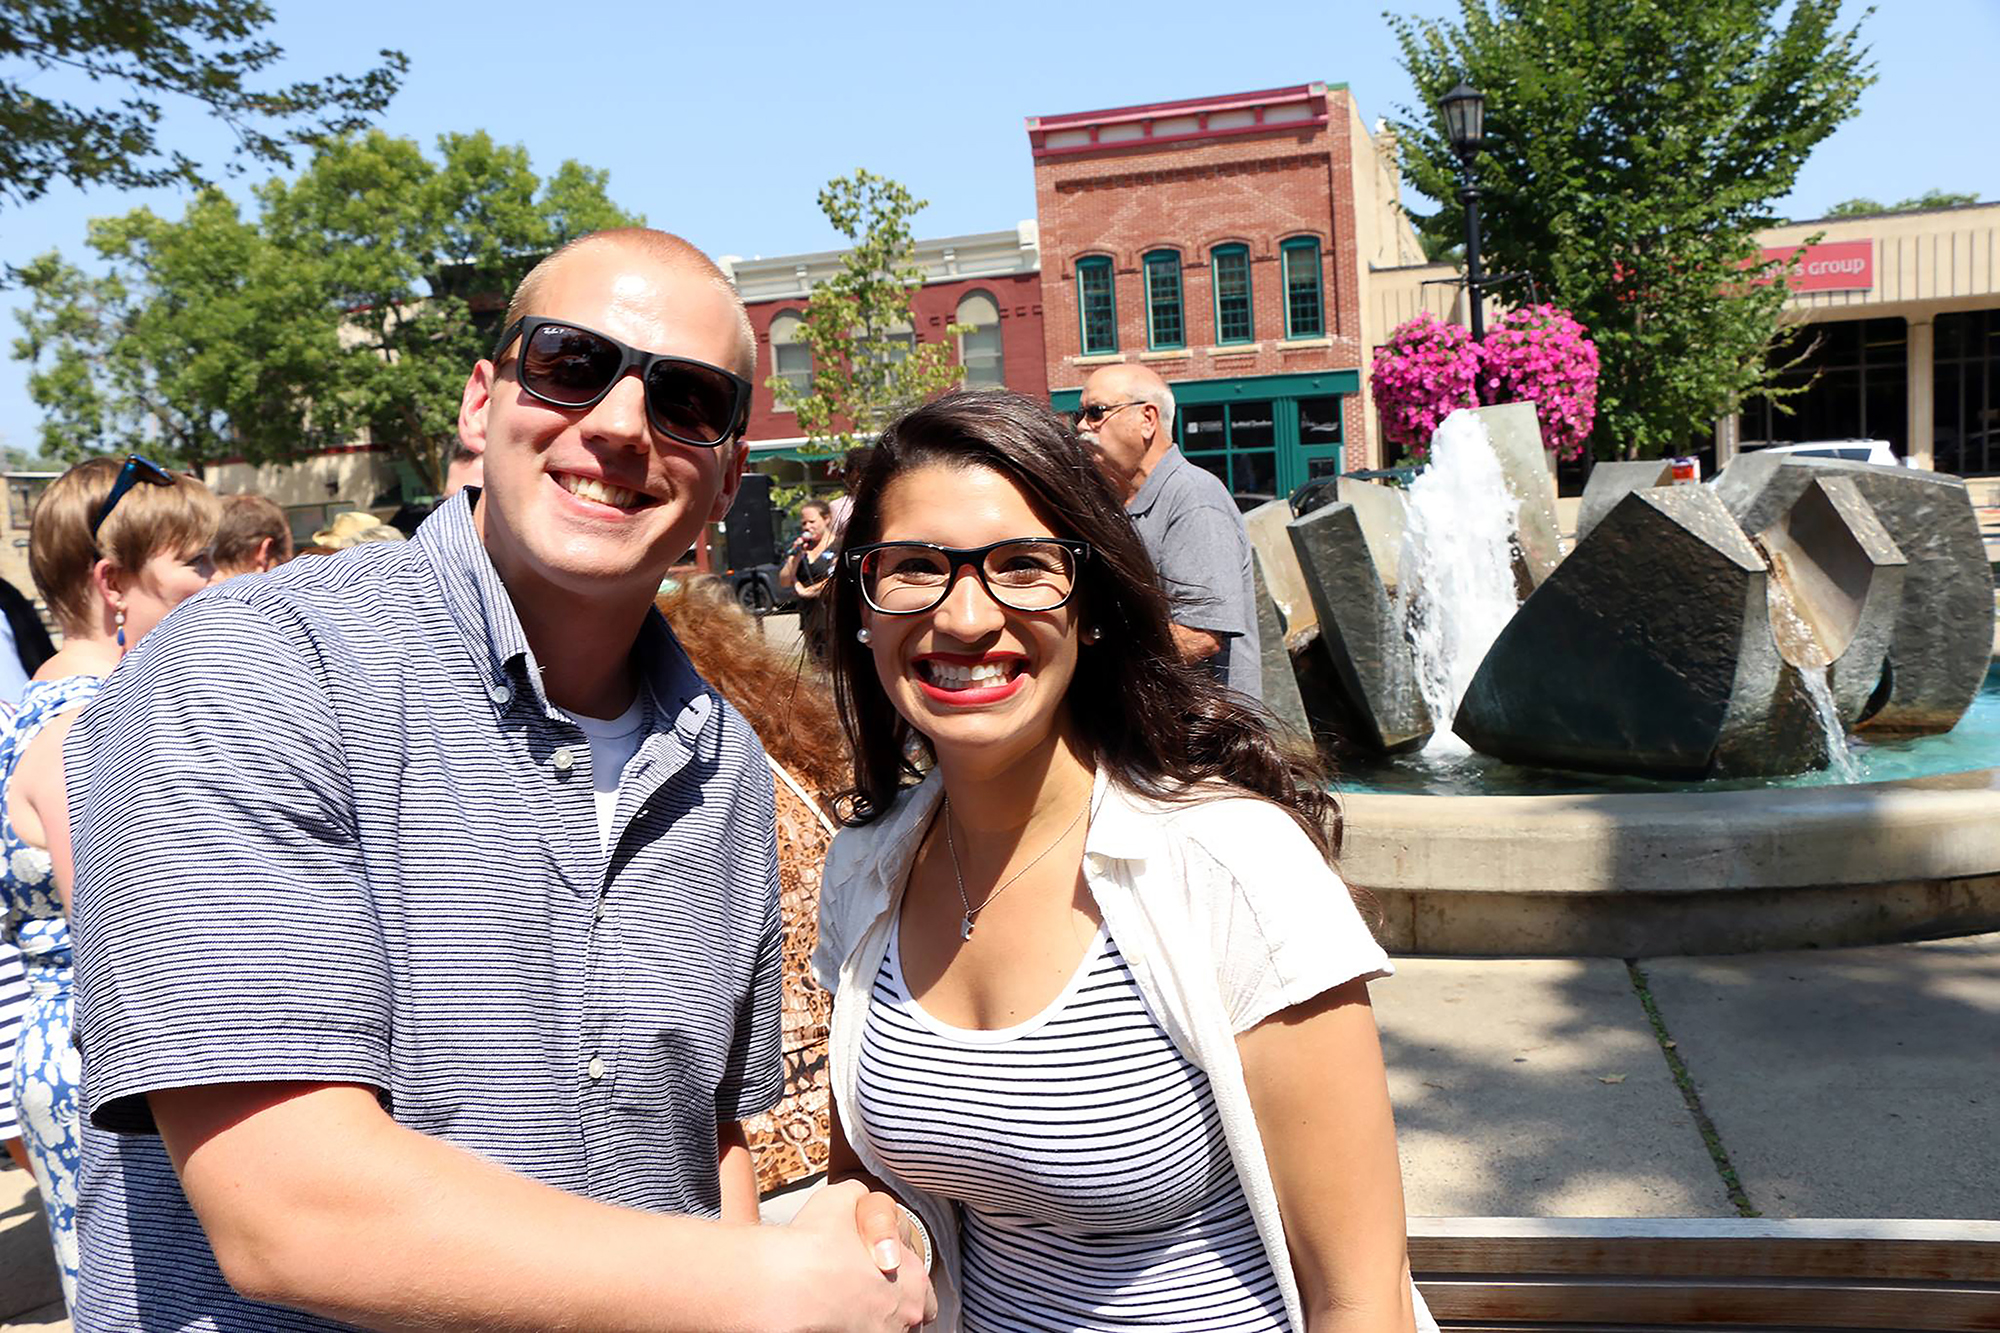 public arts commission Founder stephen dewyer handshakes with Erin Maye Quade in front of public art in Northfield, Minnesota on 13 August 2018